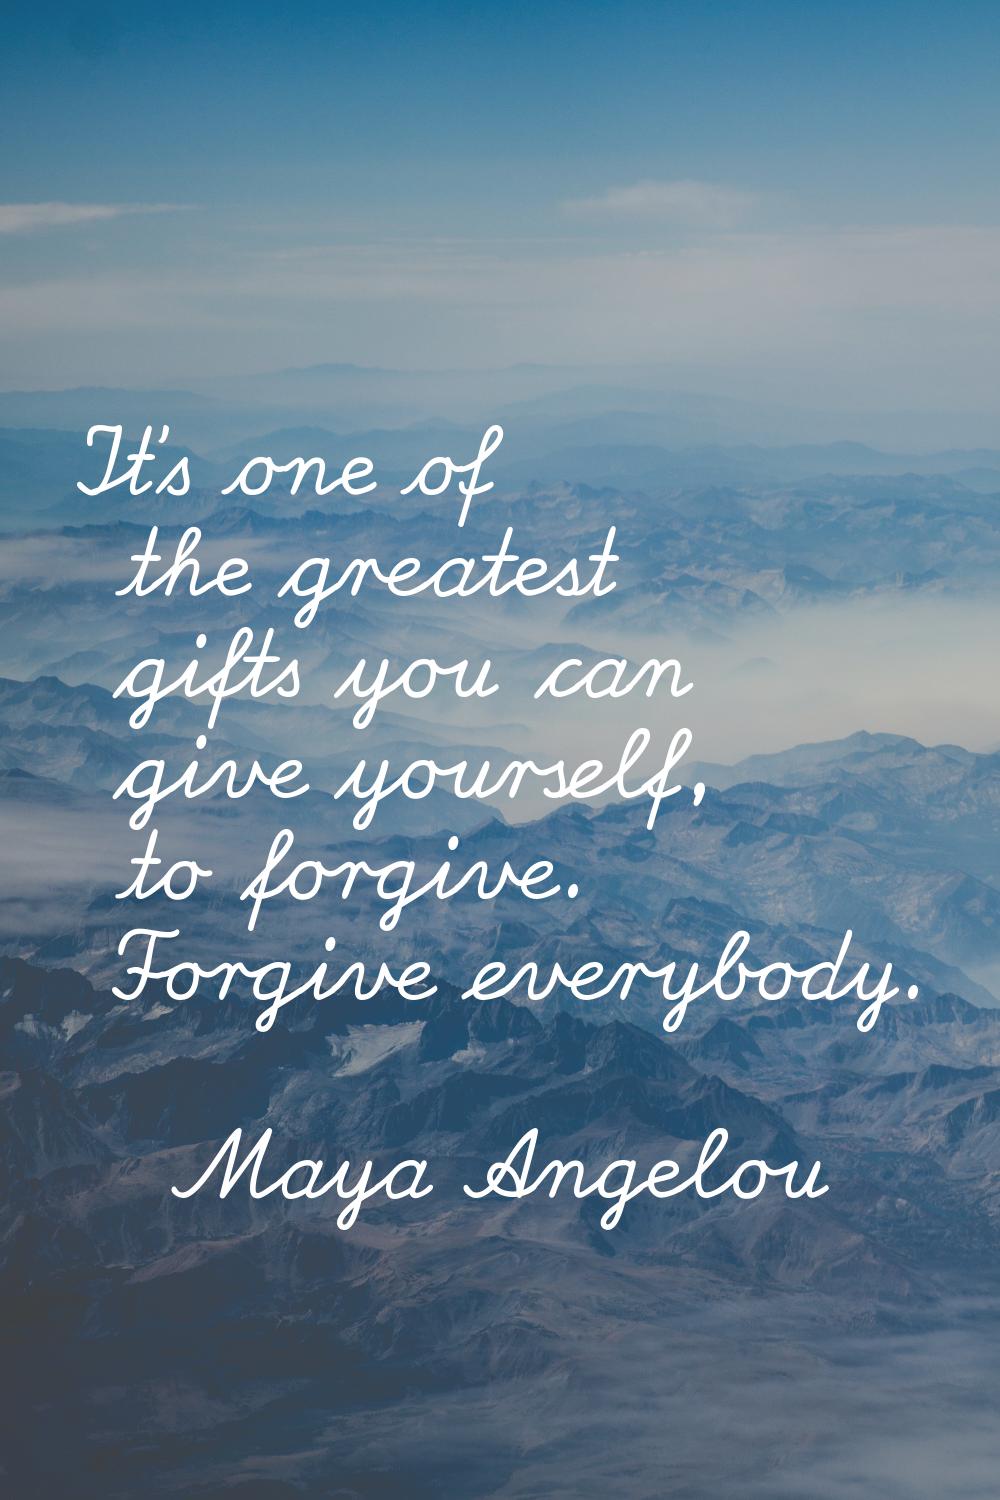 It's one of the greatest gifts you can give yourself, to forgive. Forgive everybody.